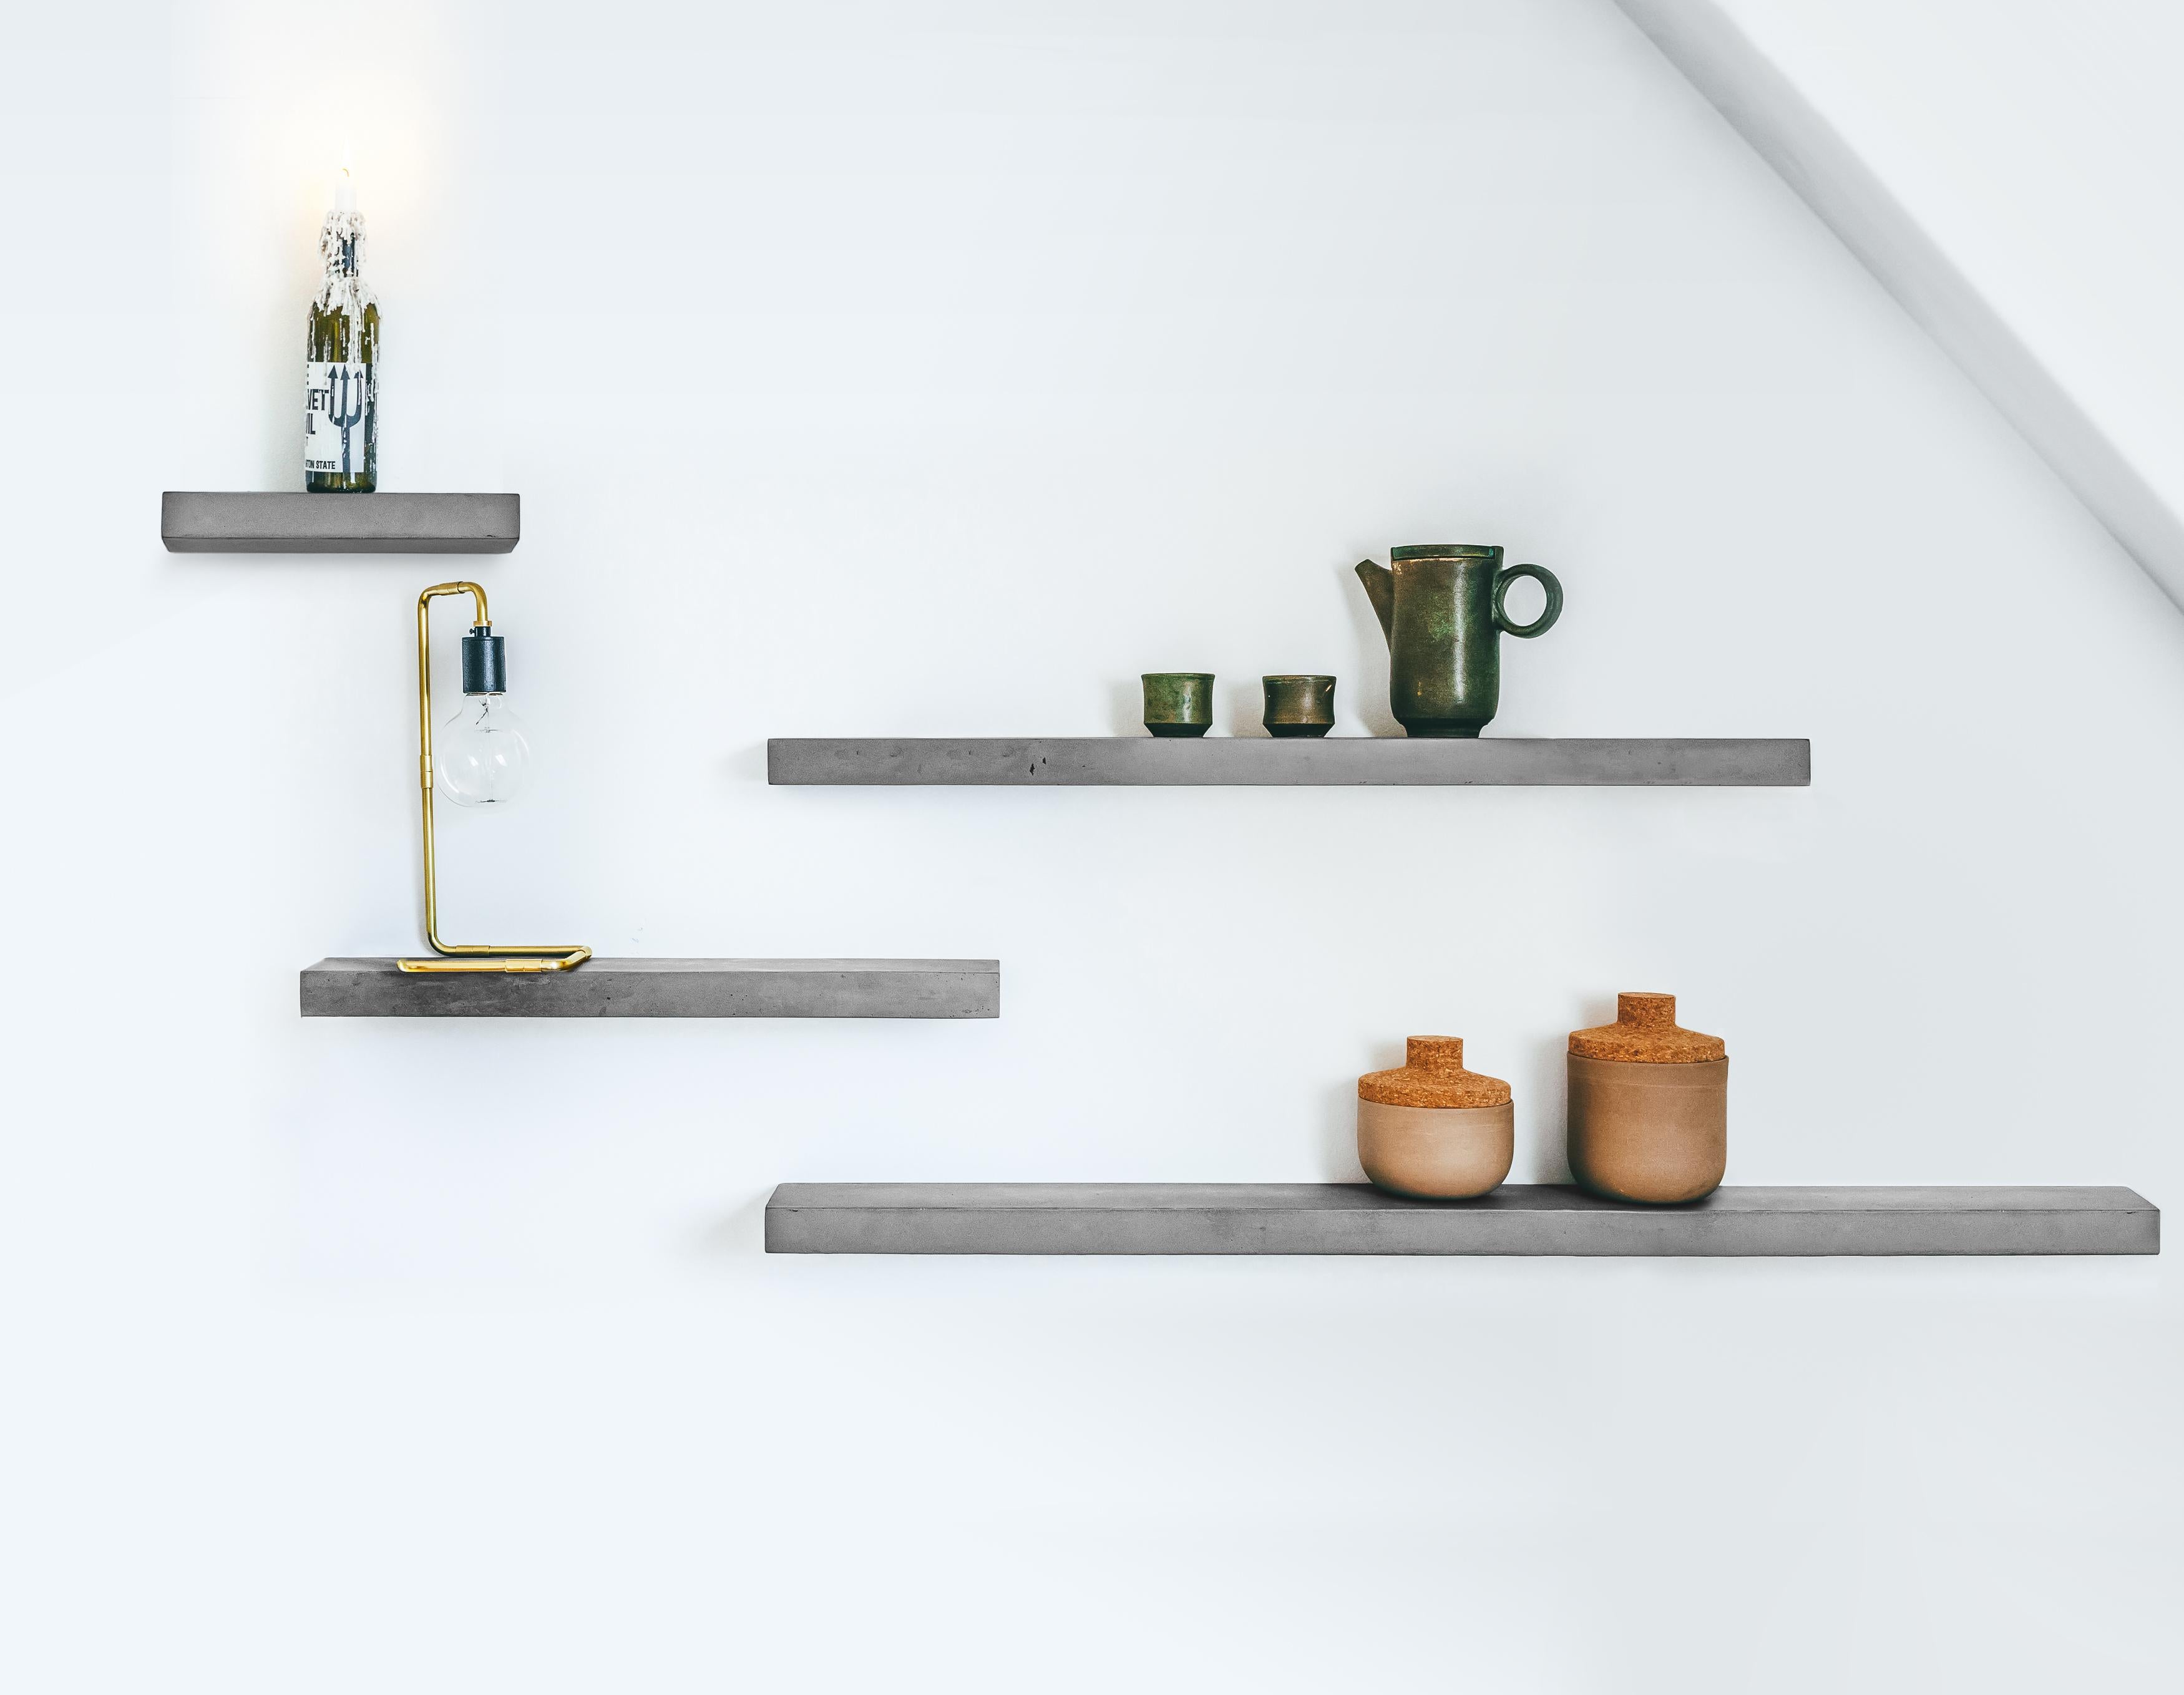 Its simple lines and the bold presence of raw concrete make this small ciment shelf great to highlight what inspires you: lithography, art photography, plants, vase, decorative objects…

Some will use it as a presentation shelf for a decoration or